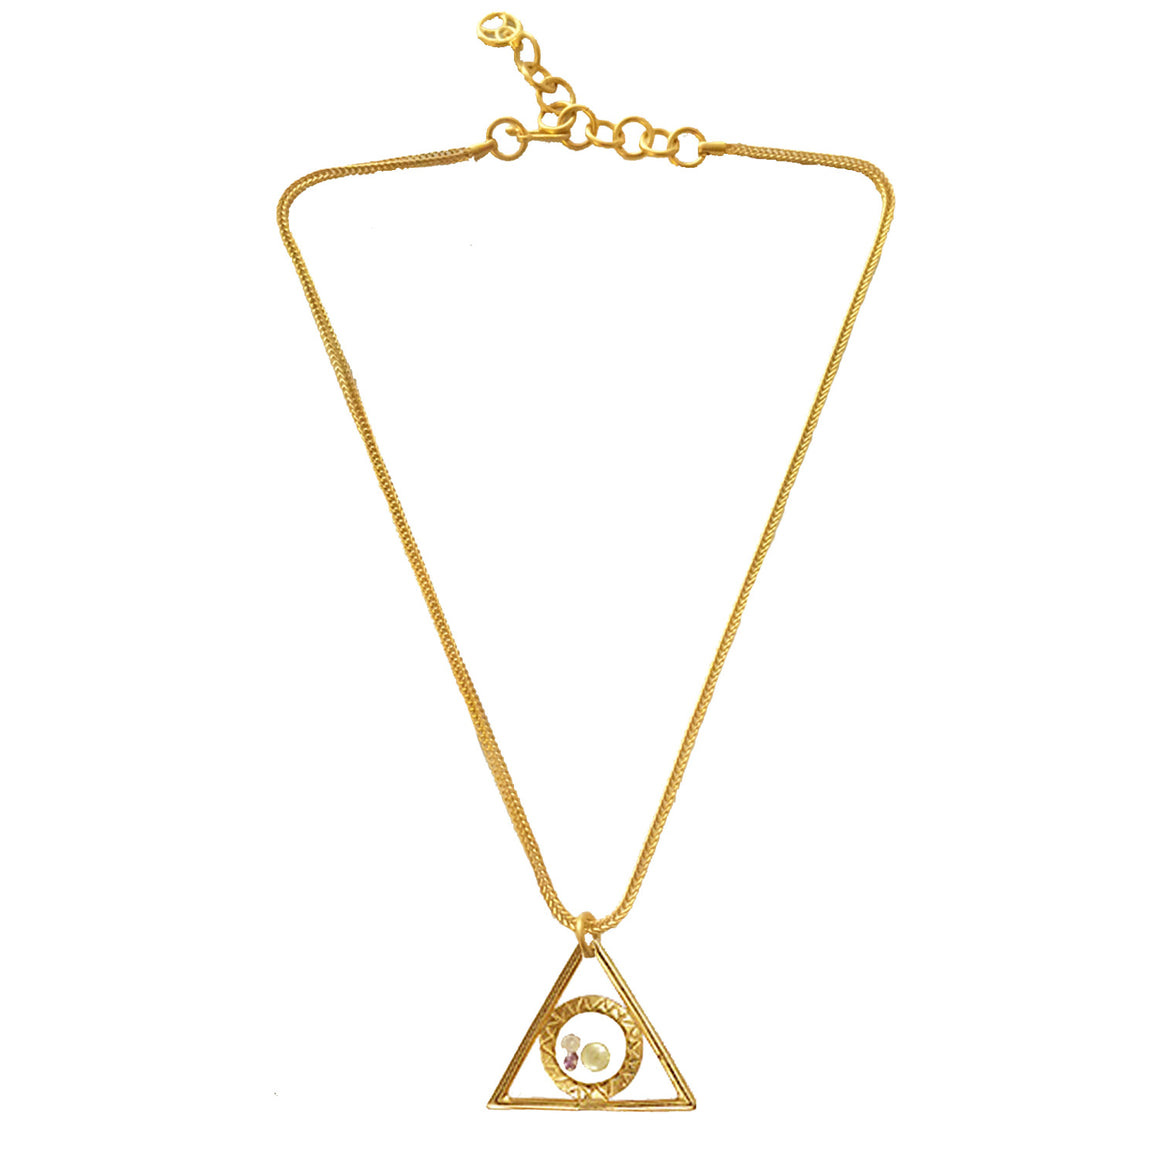 floating-triangle-necklace-in-gold-designed-by-alexandrakoumba